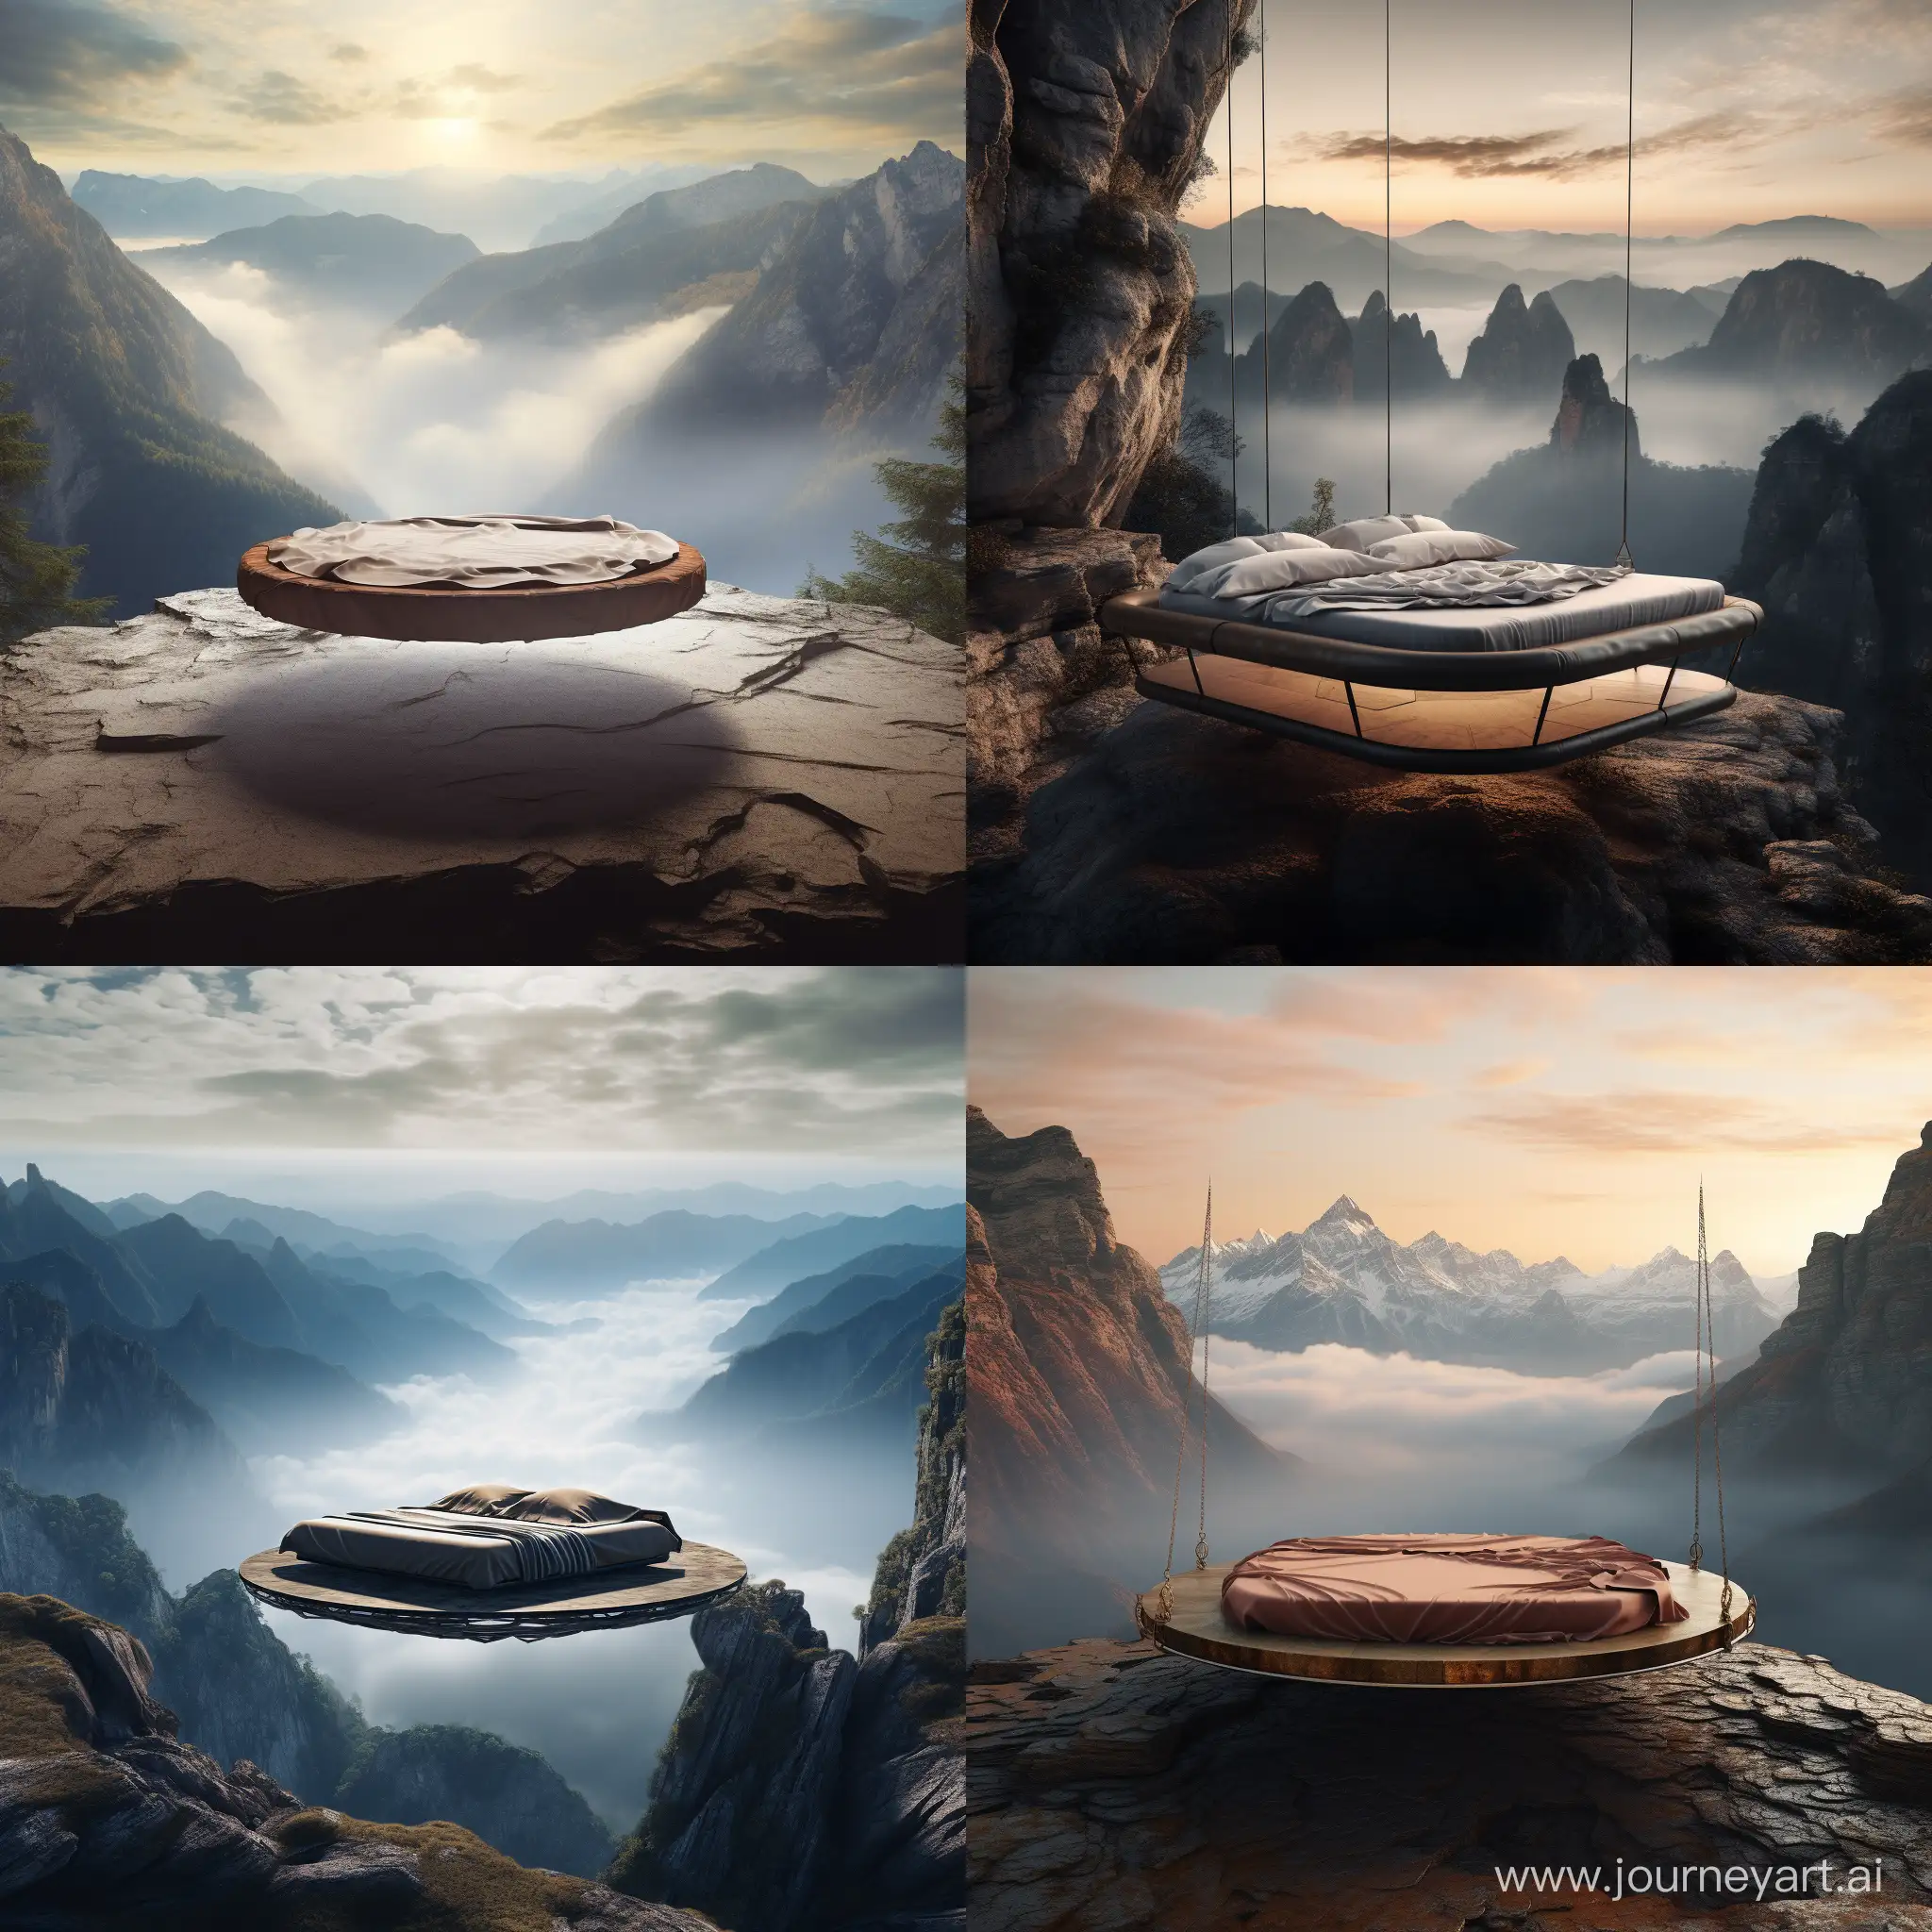 Serenity-in-the-Skies-Levitating-Bed-Amidst-Majestic-Mountains